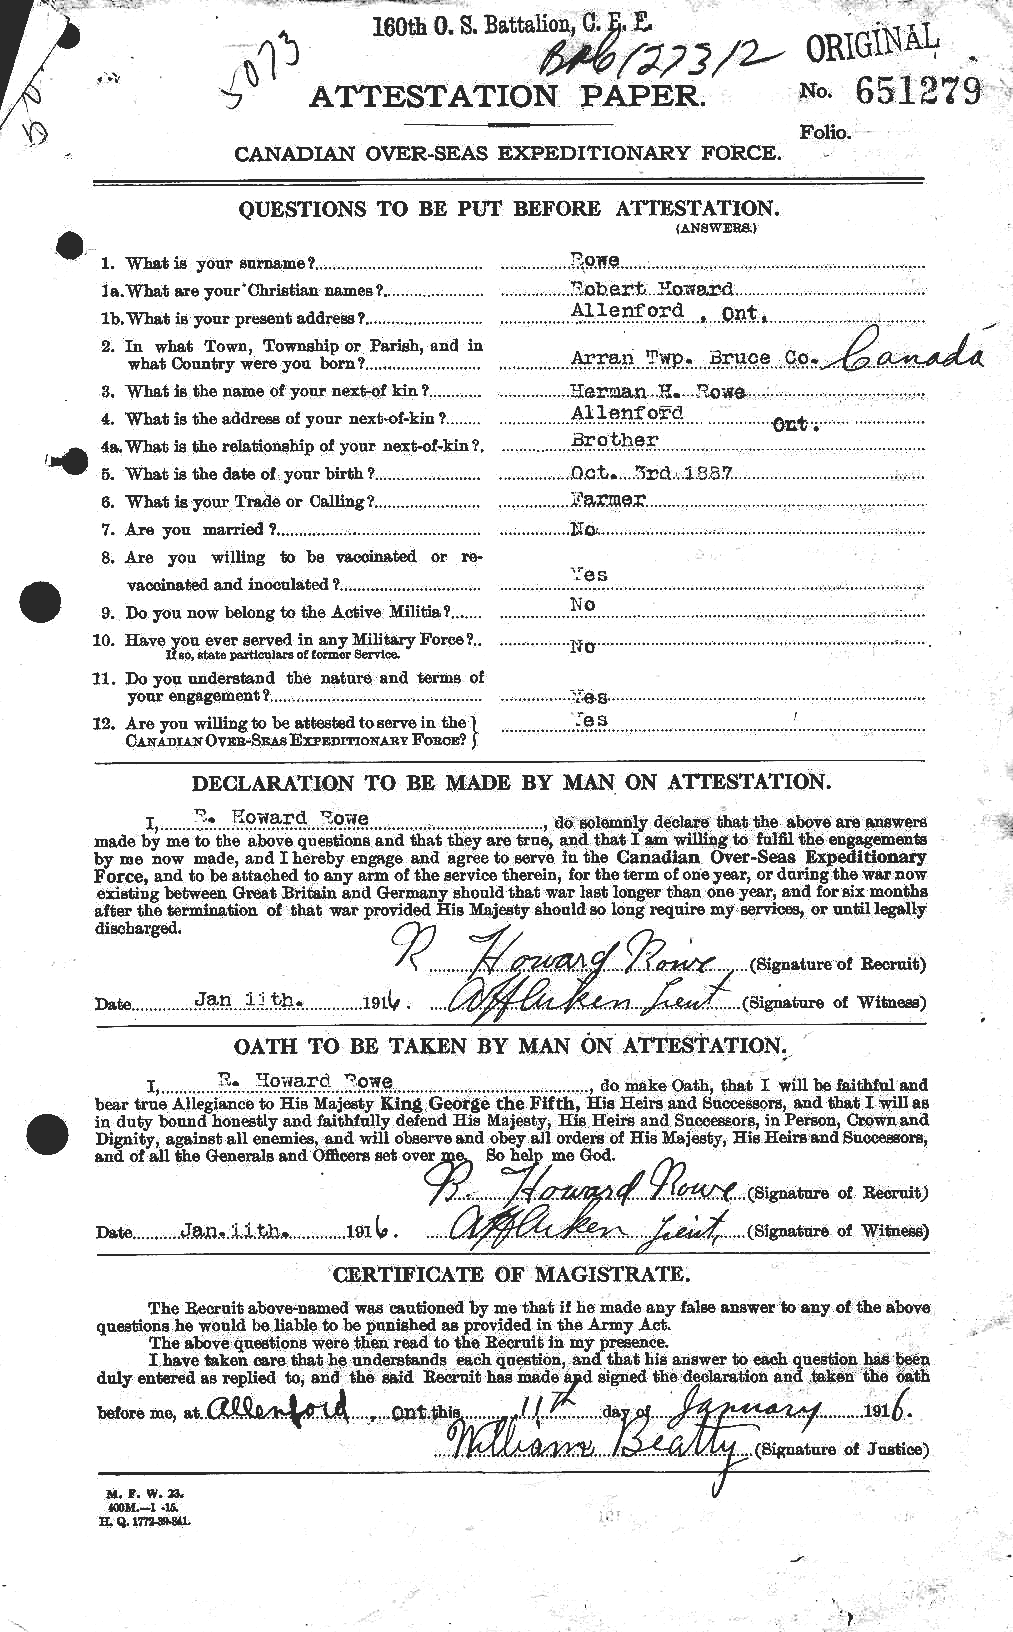 Personnel Records of the First World War - CEF 615972a